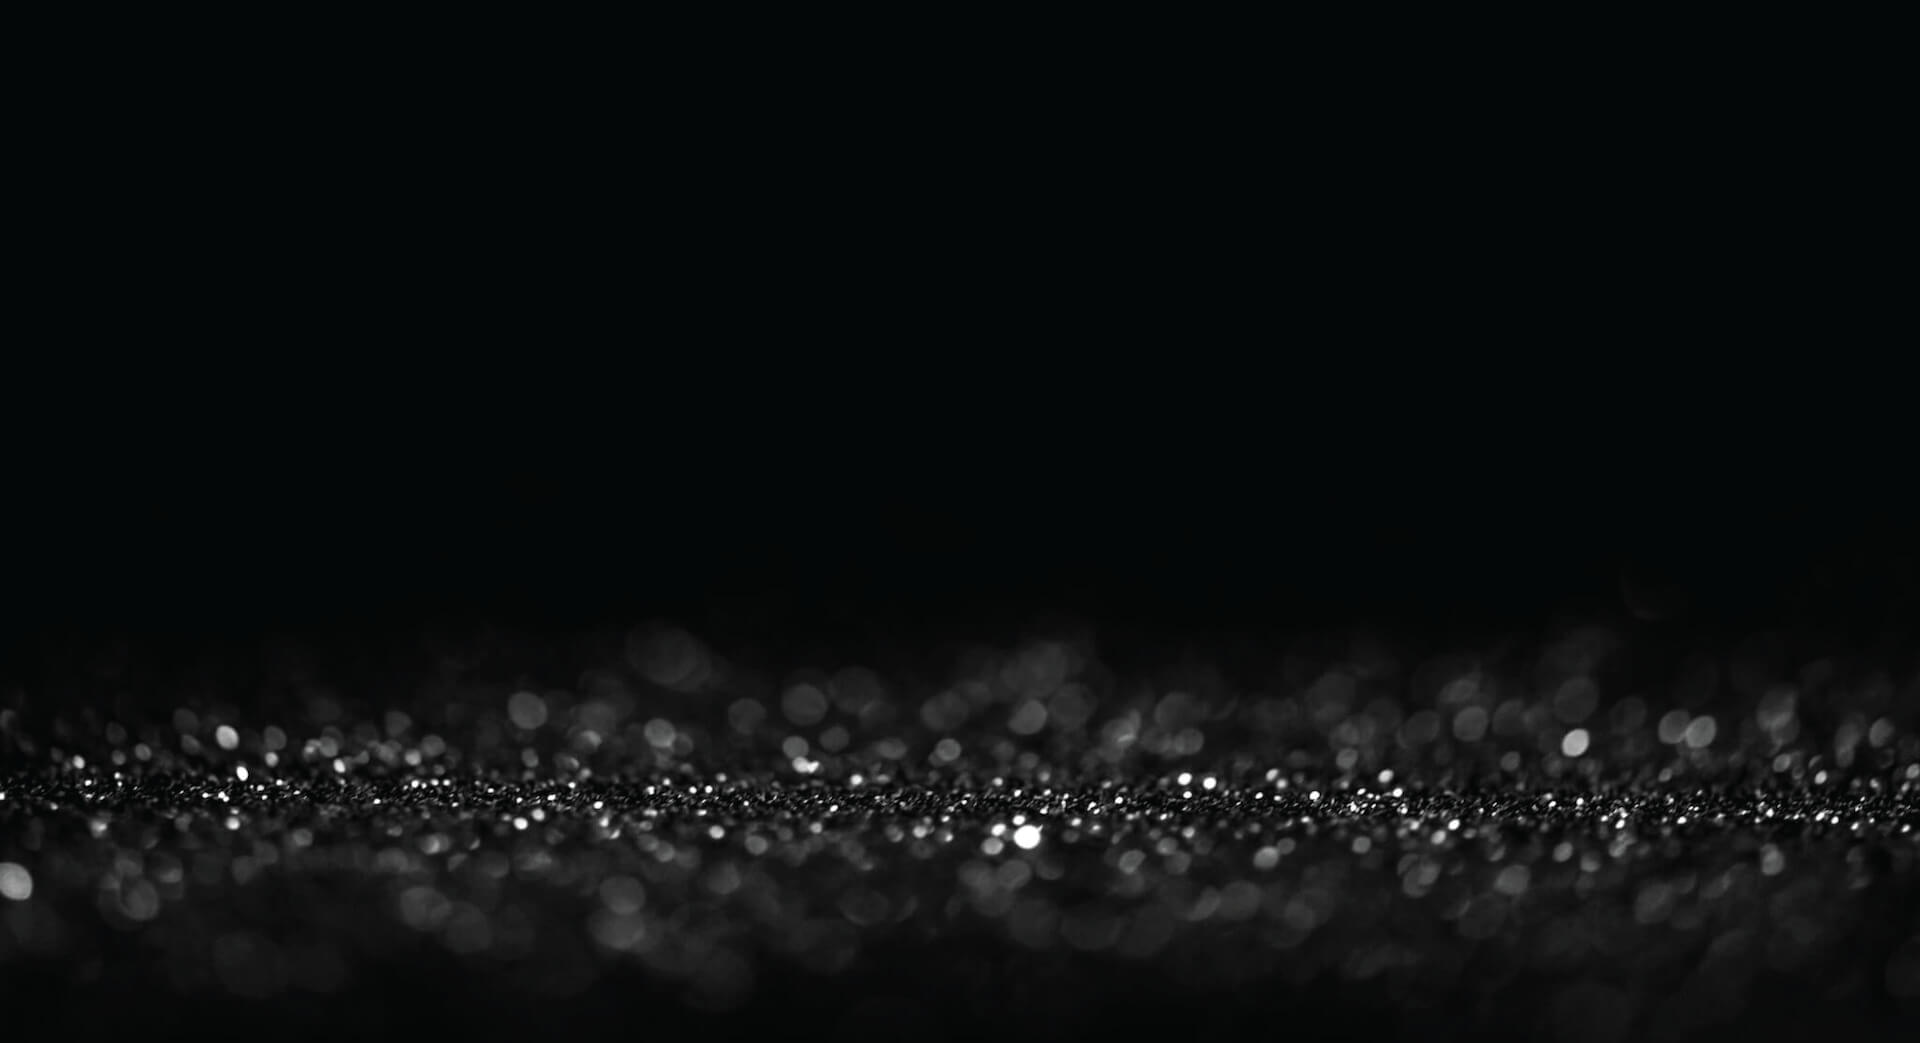 A black background graphic featuring clusters of silver speckles of confetti.